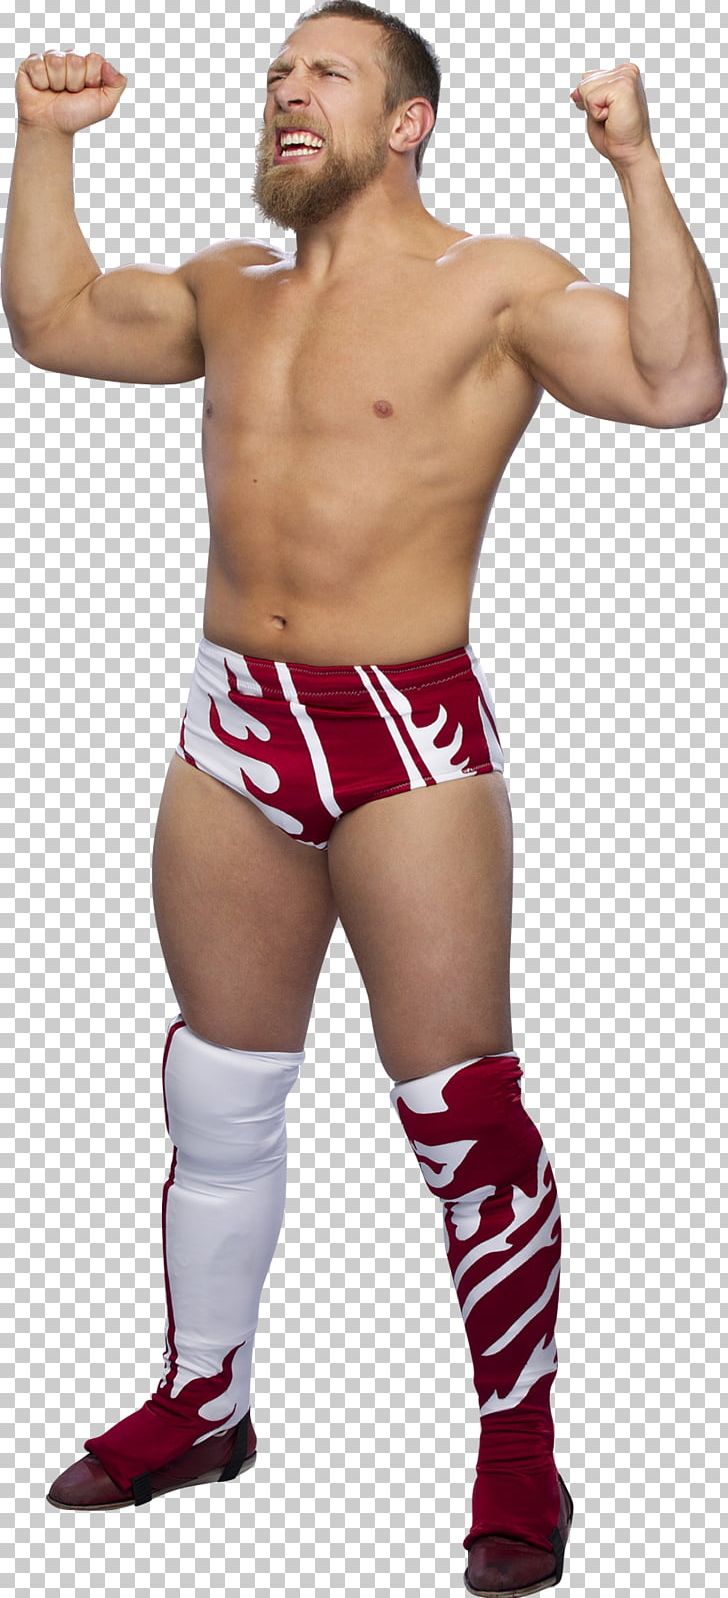 Daniel Bryan Over The Limit 2012 Professional Wrestling Male World Championship Wrestling PNG, Clipart, Abdomen, Active Undergarment, Arm, Boxing Glove, Over The Limit 2012 Free PNG Download